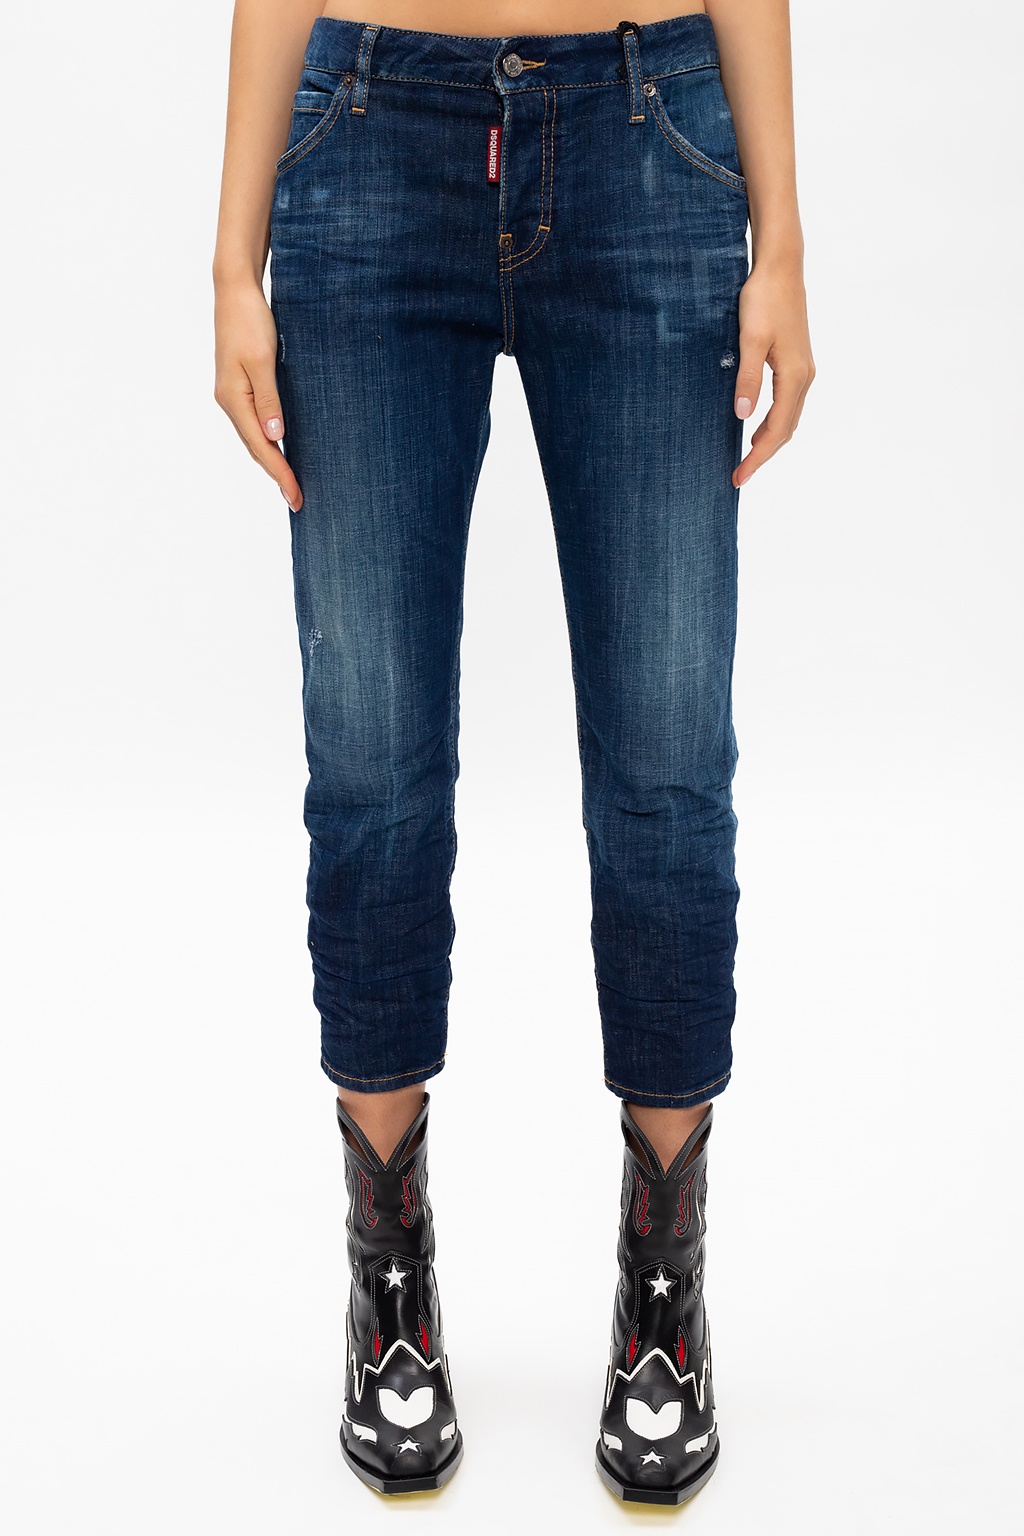 Dsquared2 'Cool Girl Cropped Jean' jeans | Women's Clothing | Vitkac